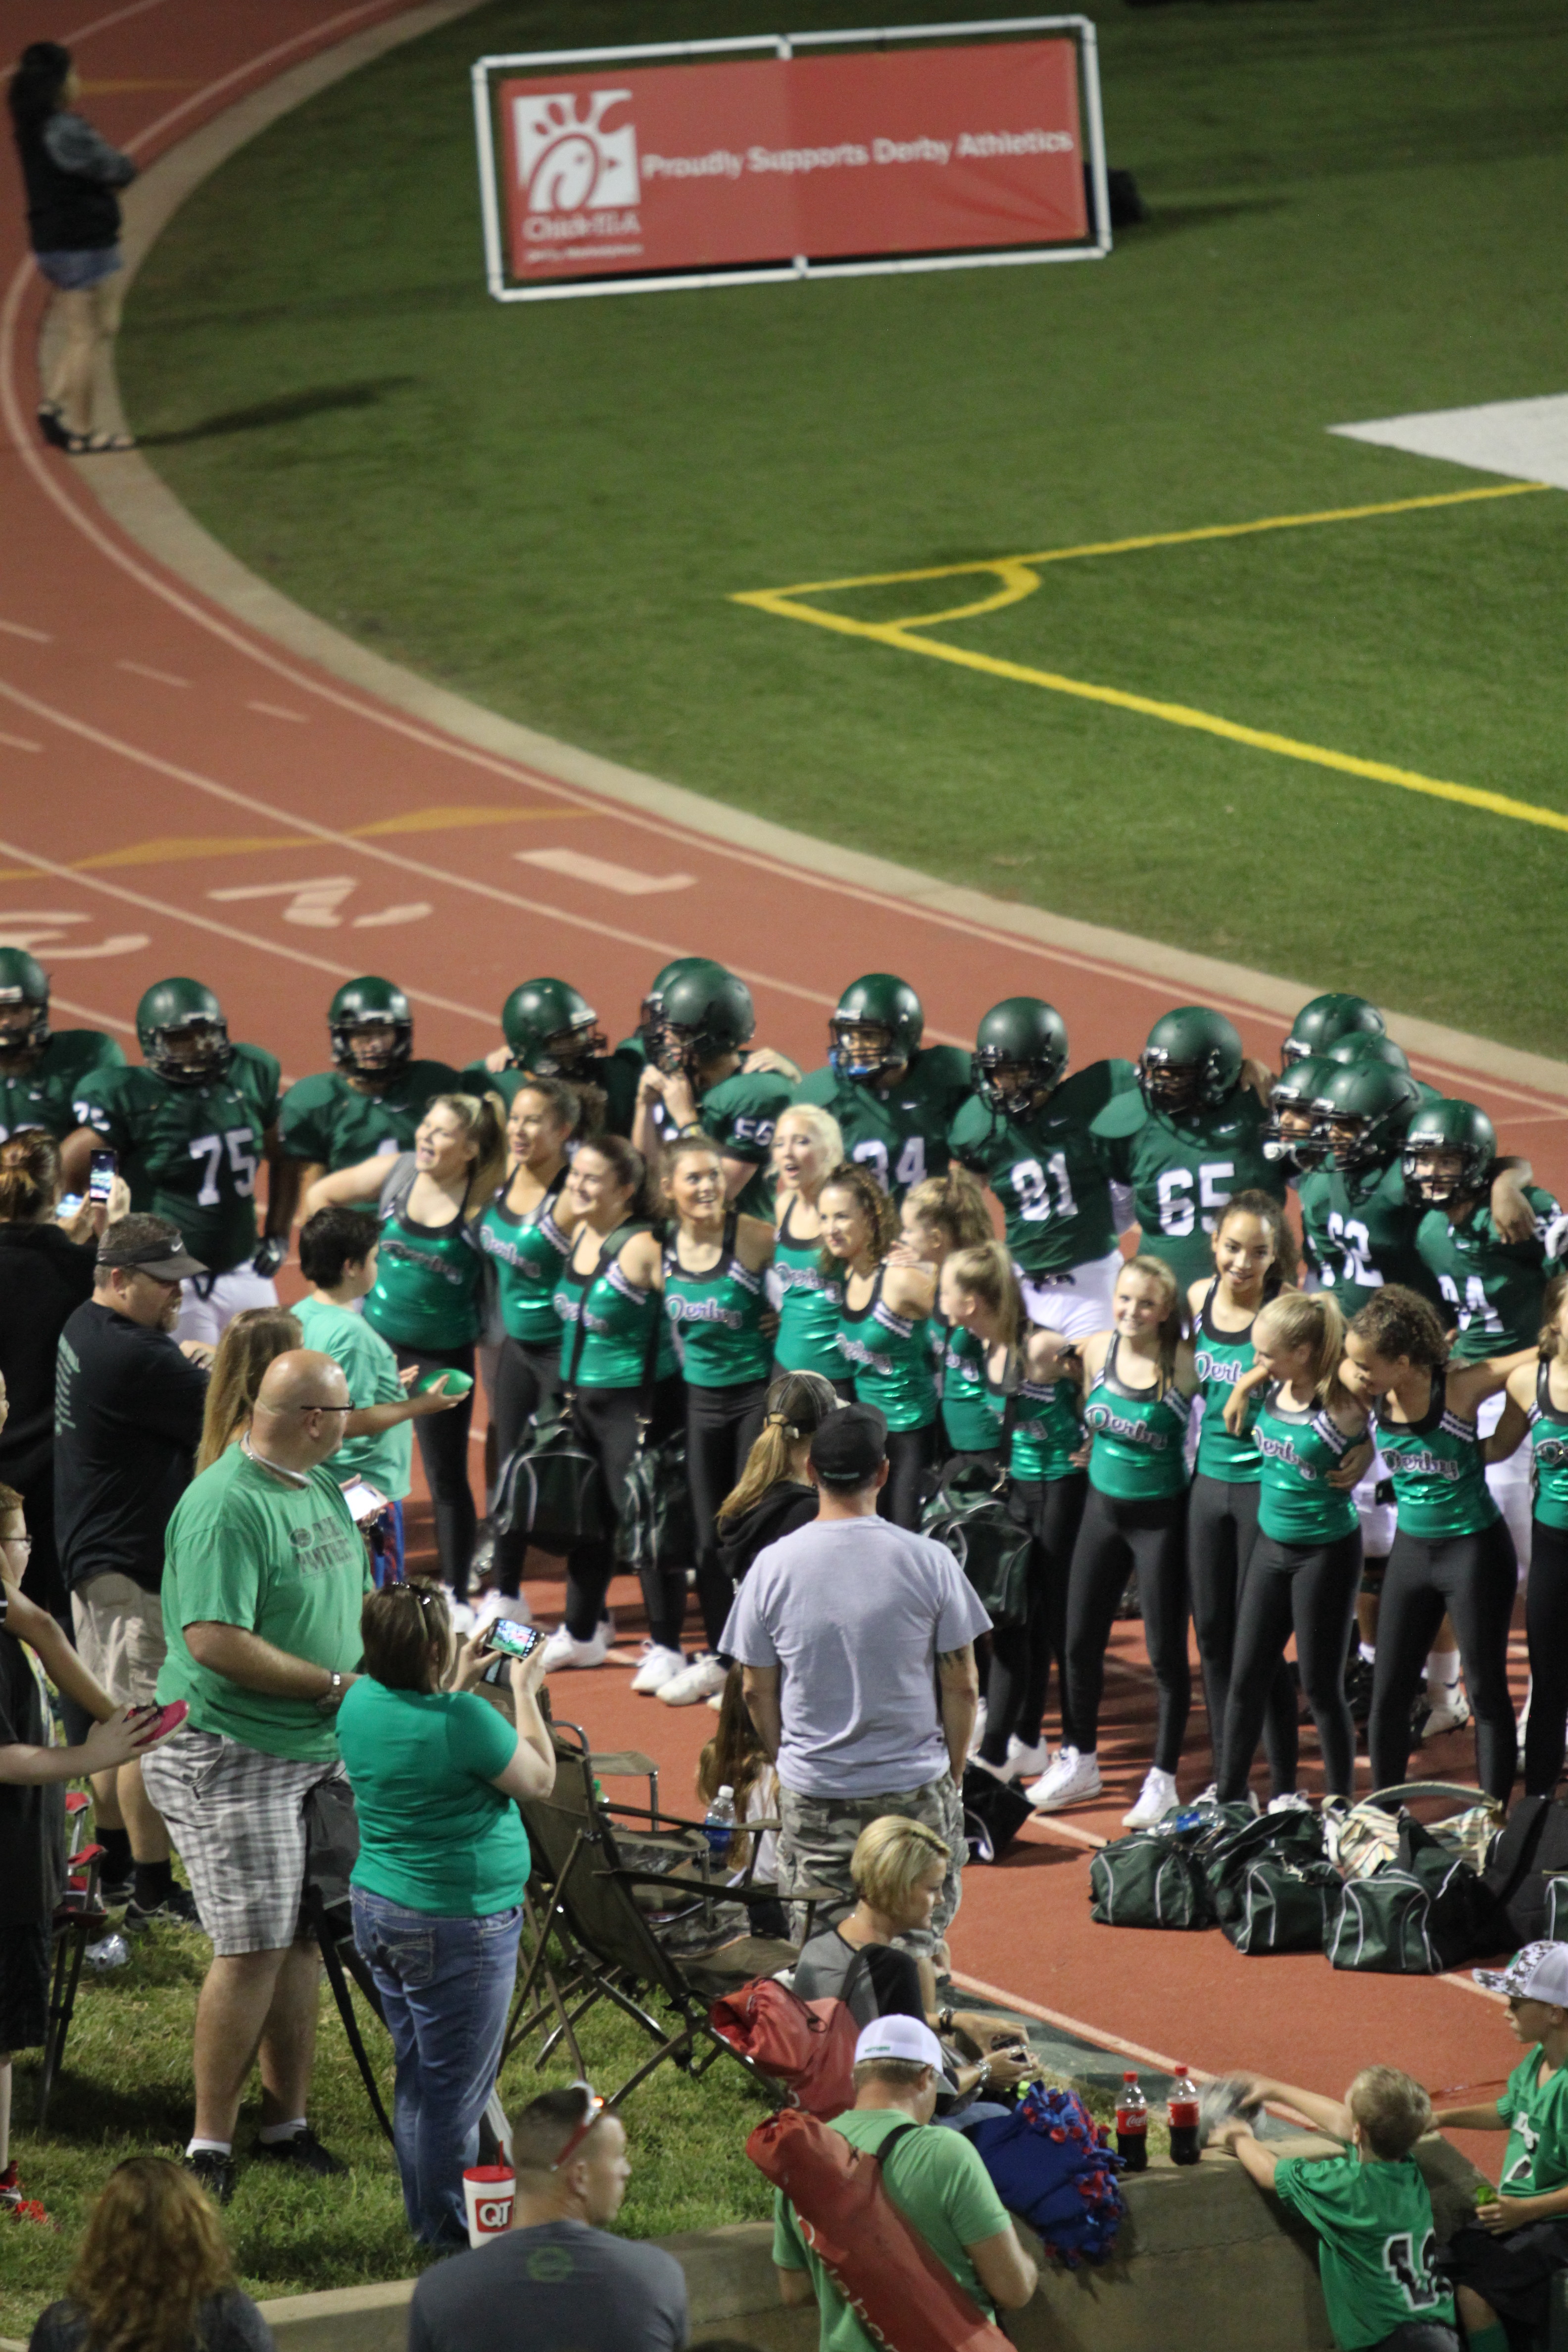 The Derby Football Team and Pantherettes get together after a stunning victory to sing the Derby Alma Mater.